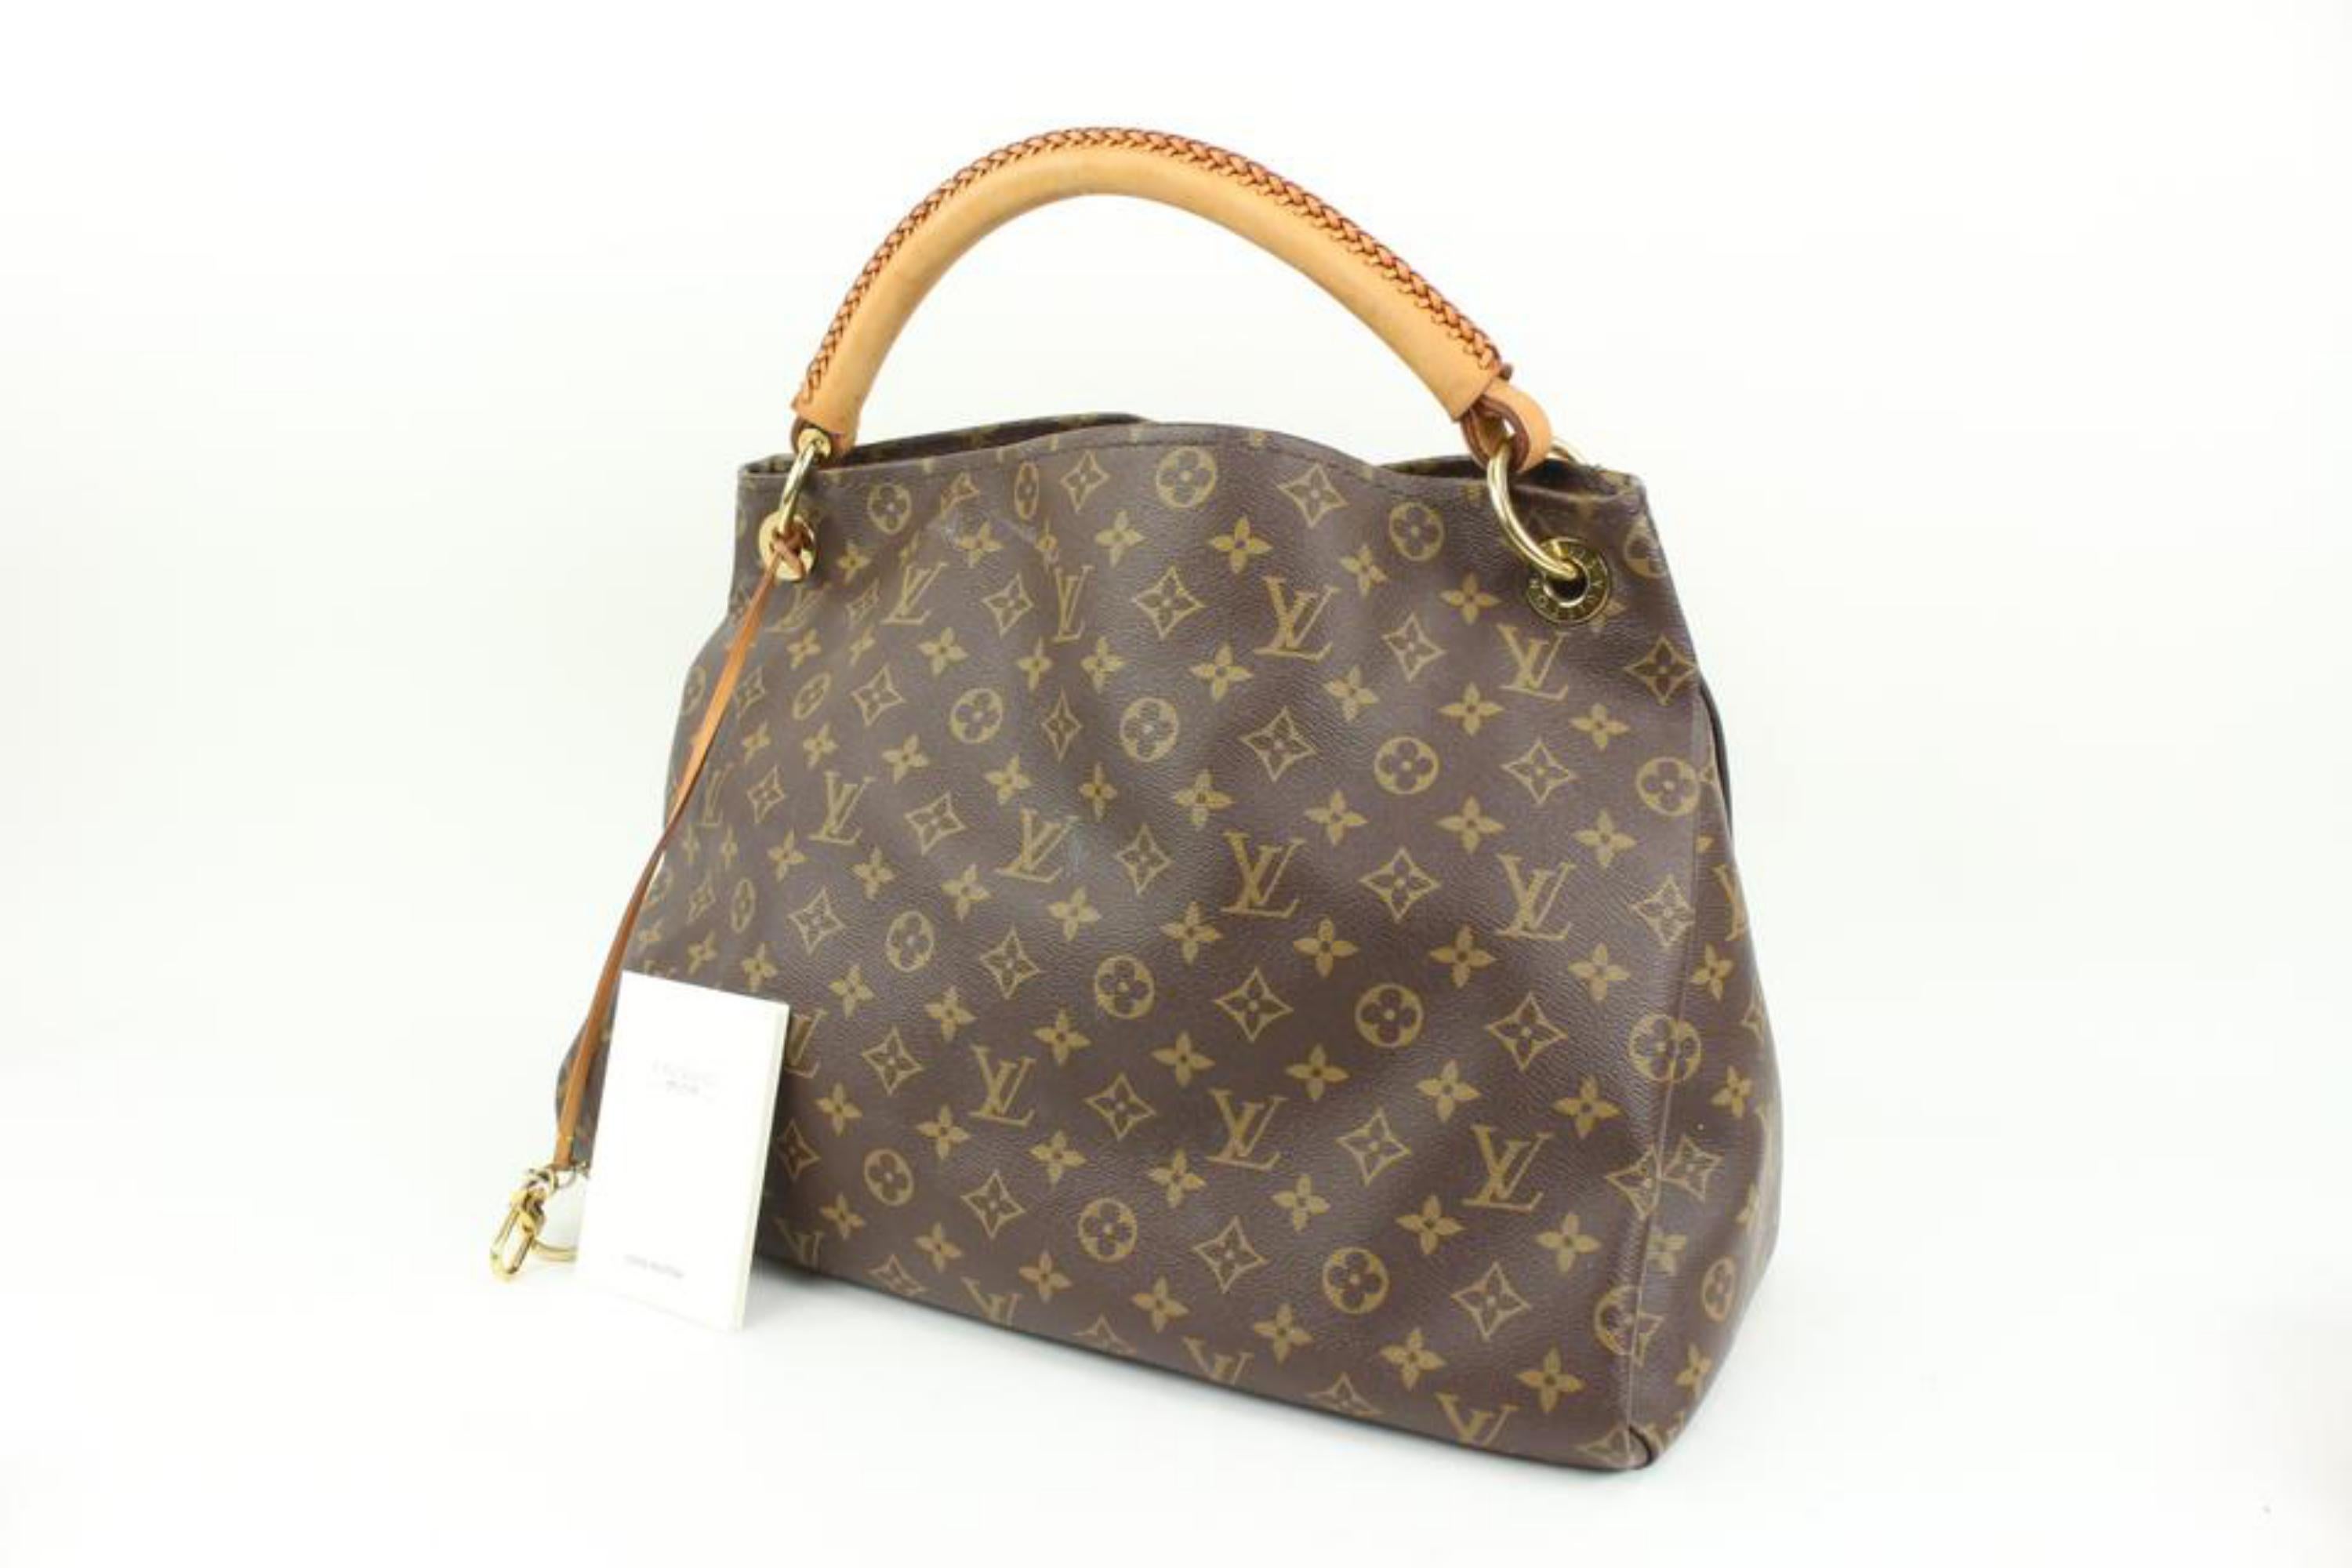 Louis Vuitton Monogram Artsy MM Hobo with Braided Handle 48lz60
Date Code/Serial Number: SD5105
Made In: U.S.A
Measurements: Length:  16.5